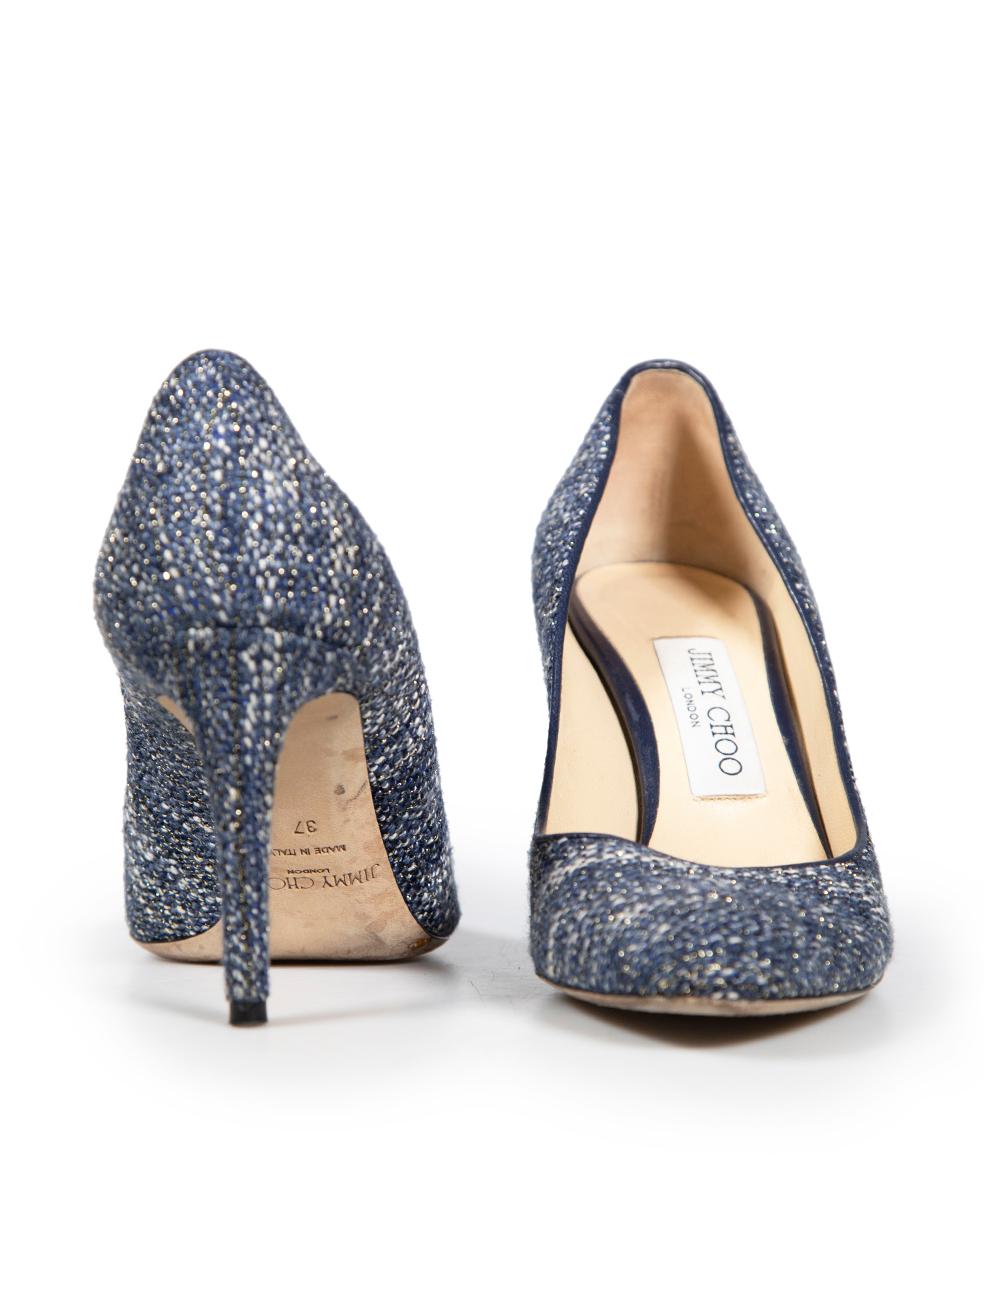 Jimmy Choo Blue Tweed Glitter Fabric Pumps Size IT 37 In Good Condition For Sale In London, GB